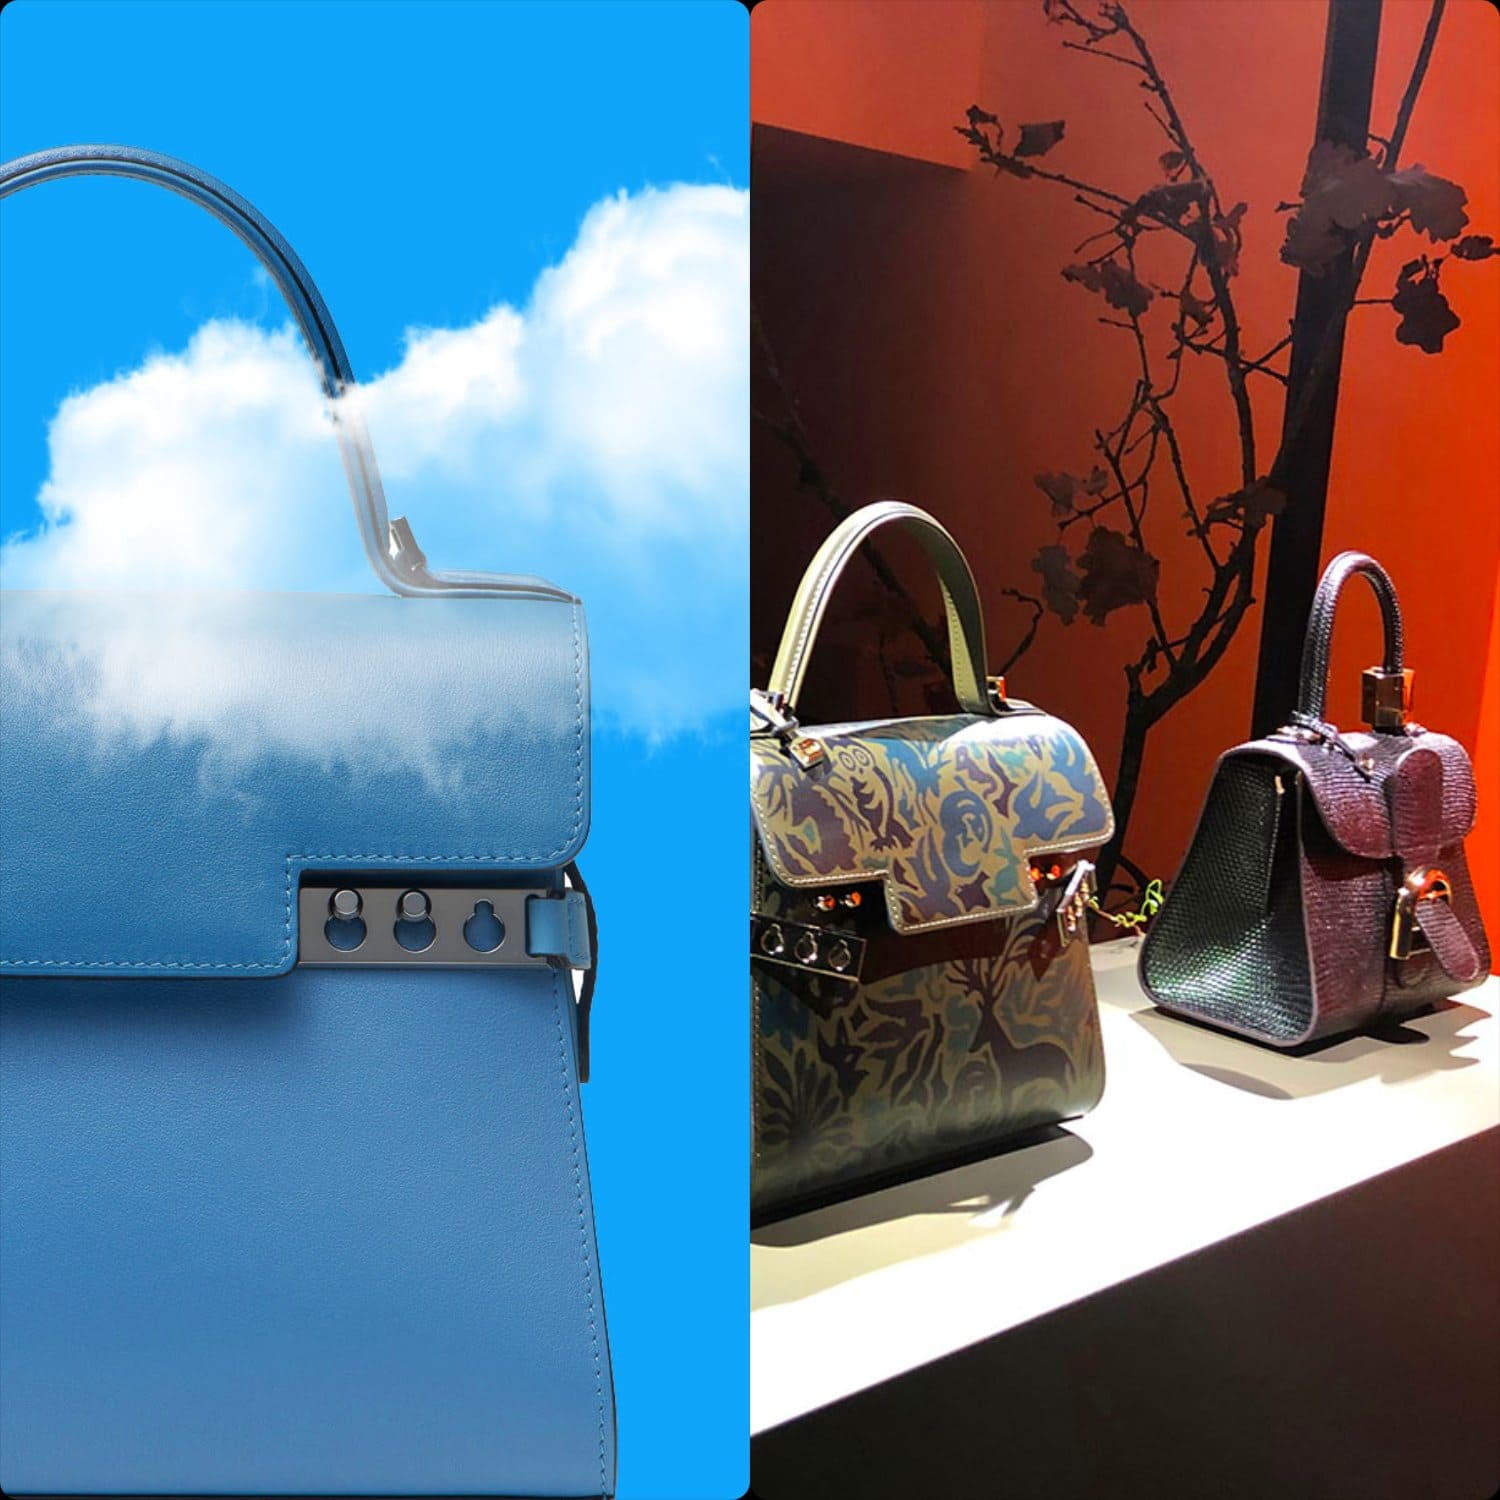 A beautiful afternoon with Delvaux exploring the exquisite creations of the  atelier @delvaux #Delvaux